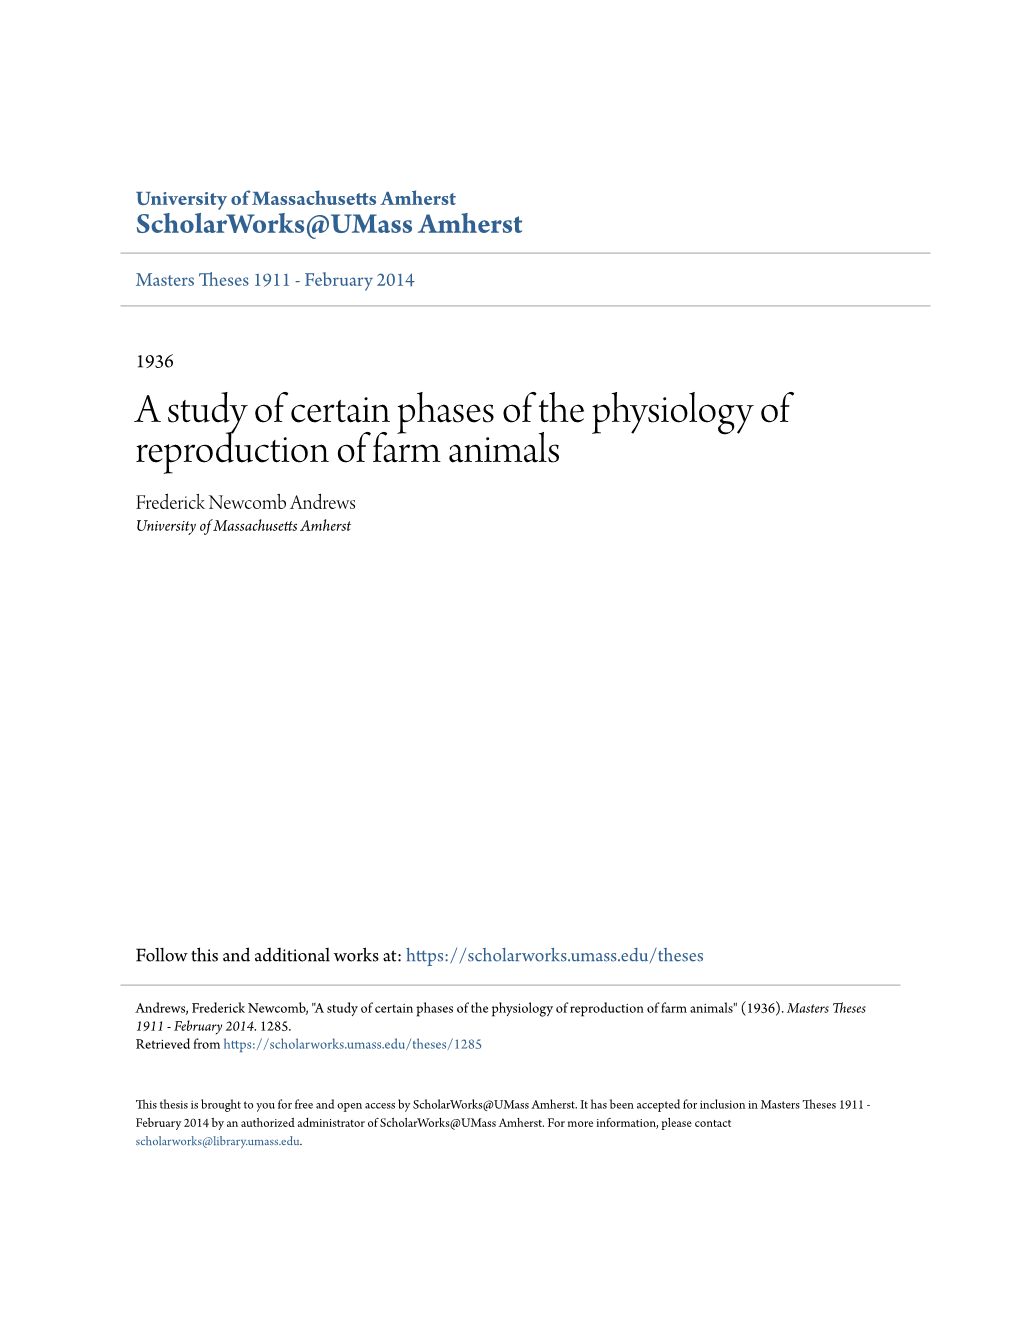 A Study of Certain Phases of the Physiology of Reproduction of Farm Animals Frederick Newcomb Andrews University of Massachusetts Amherst